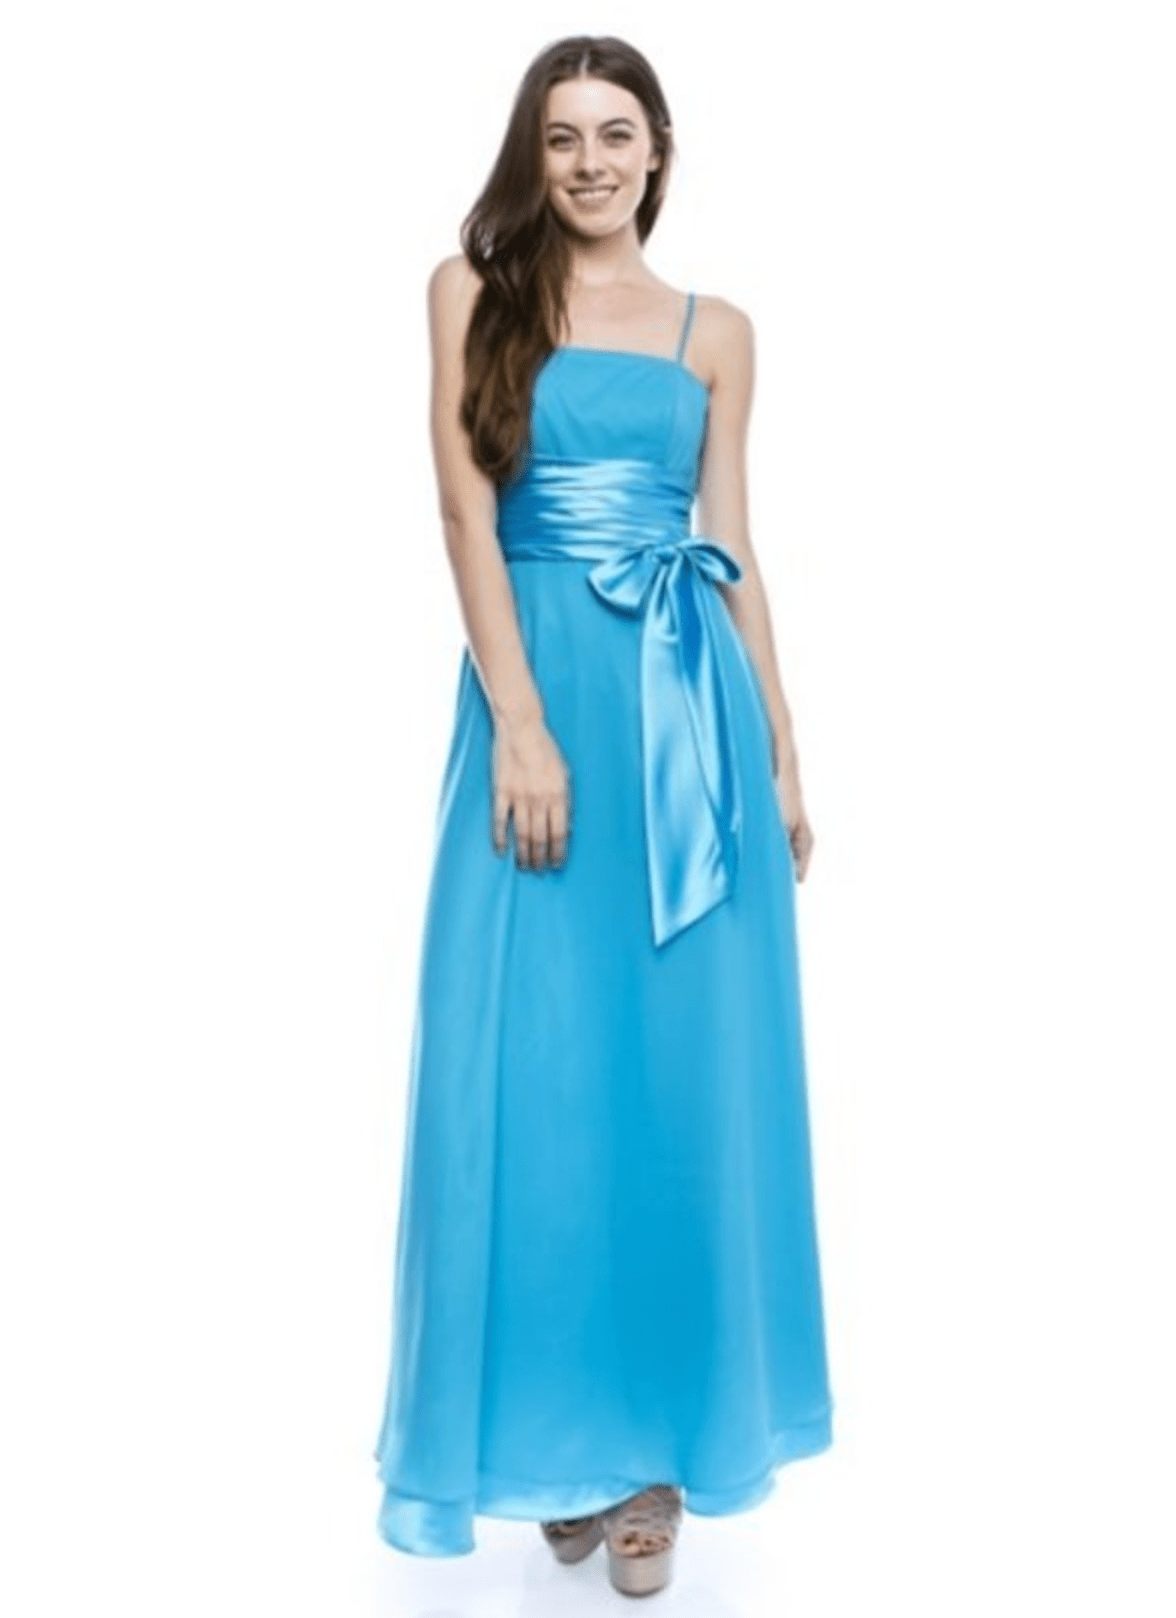 Long Chiffon Dress by Chicas | 19 Colors Collection 2 - NORMA REED